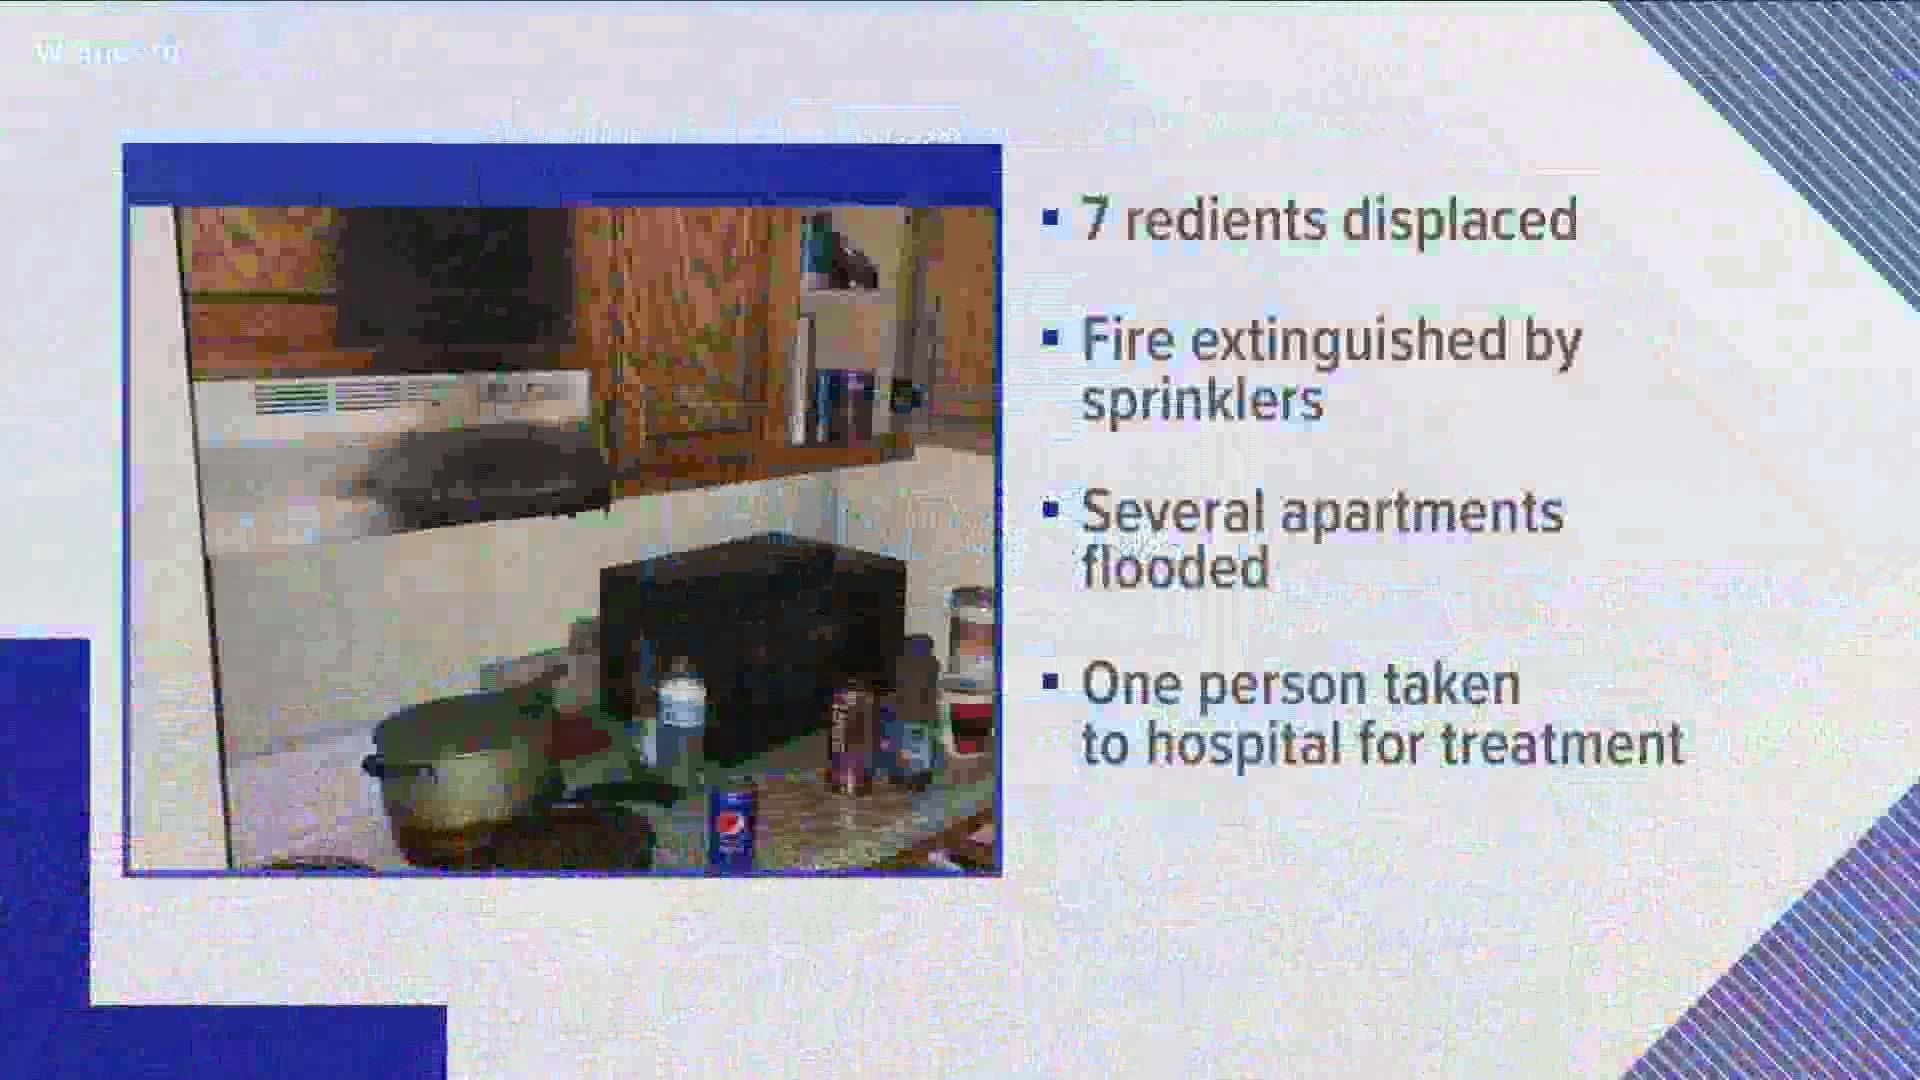 One 60-year-old woman was taken to the hospital for smoke inhalation.